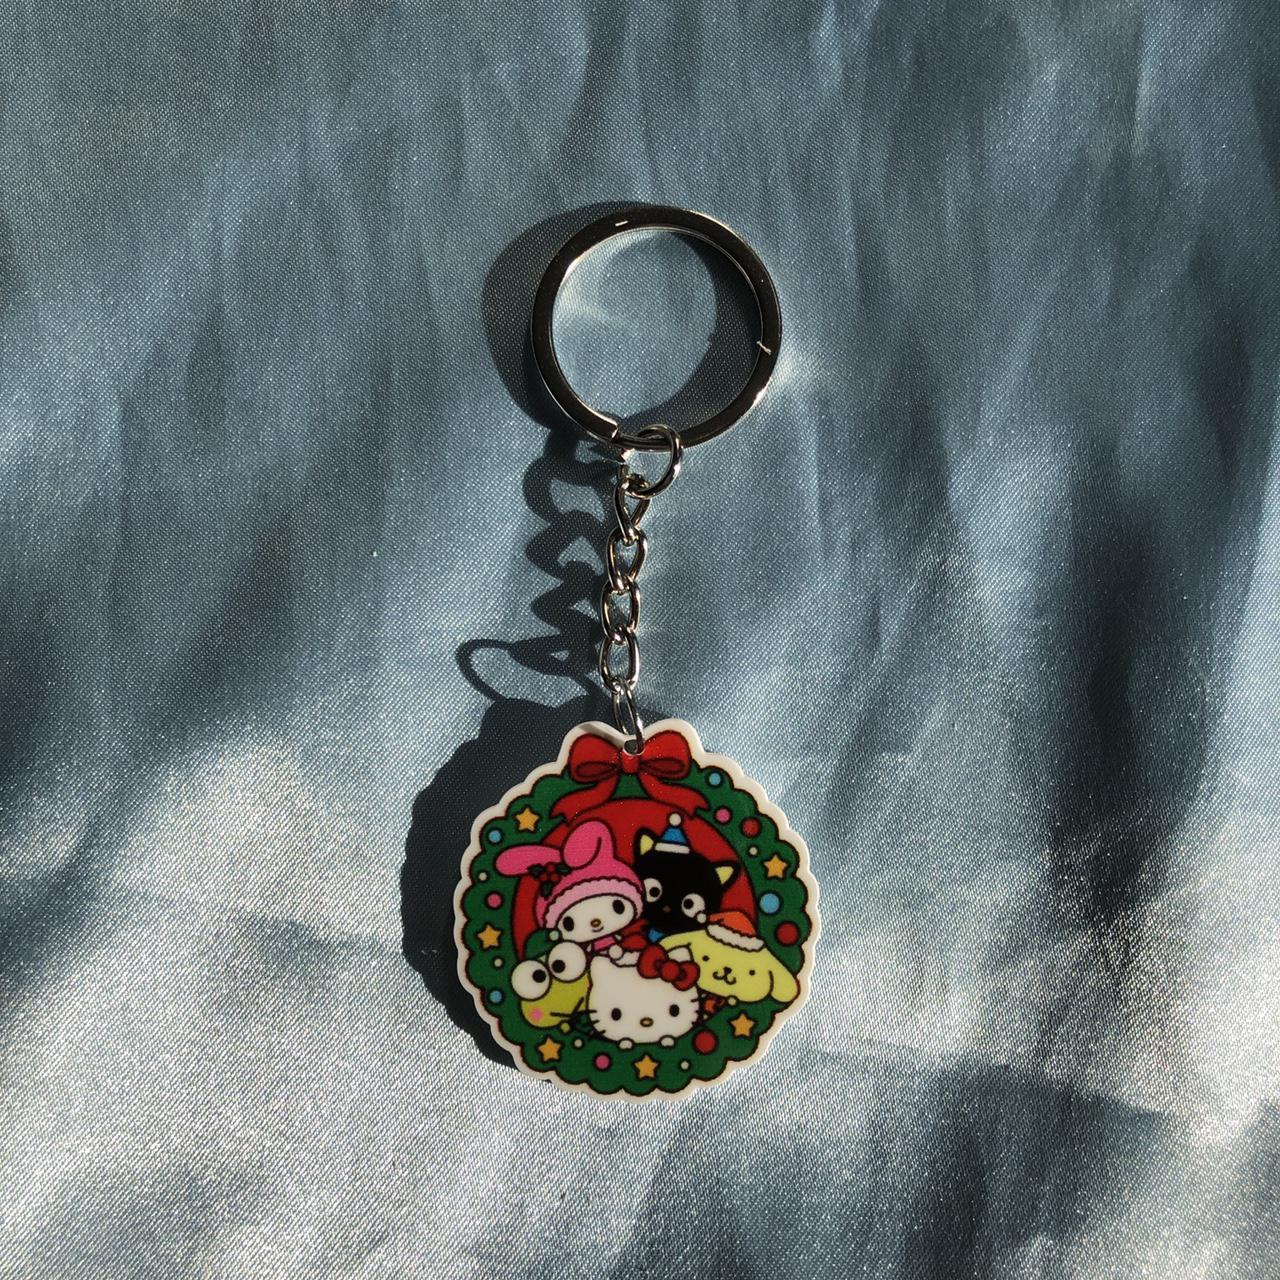 Product Image 1 - -Hello kitty keychain
-All Sales Are